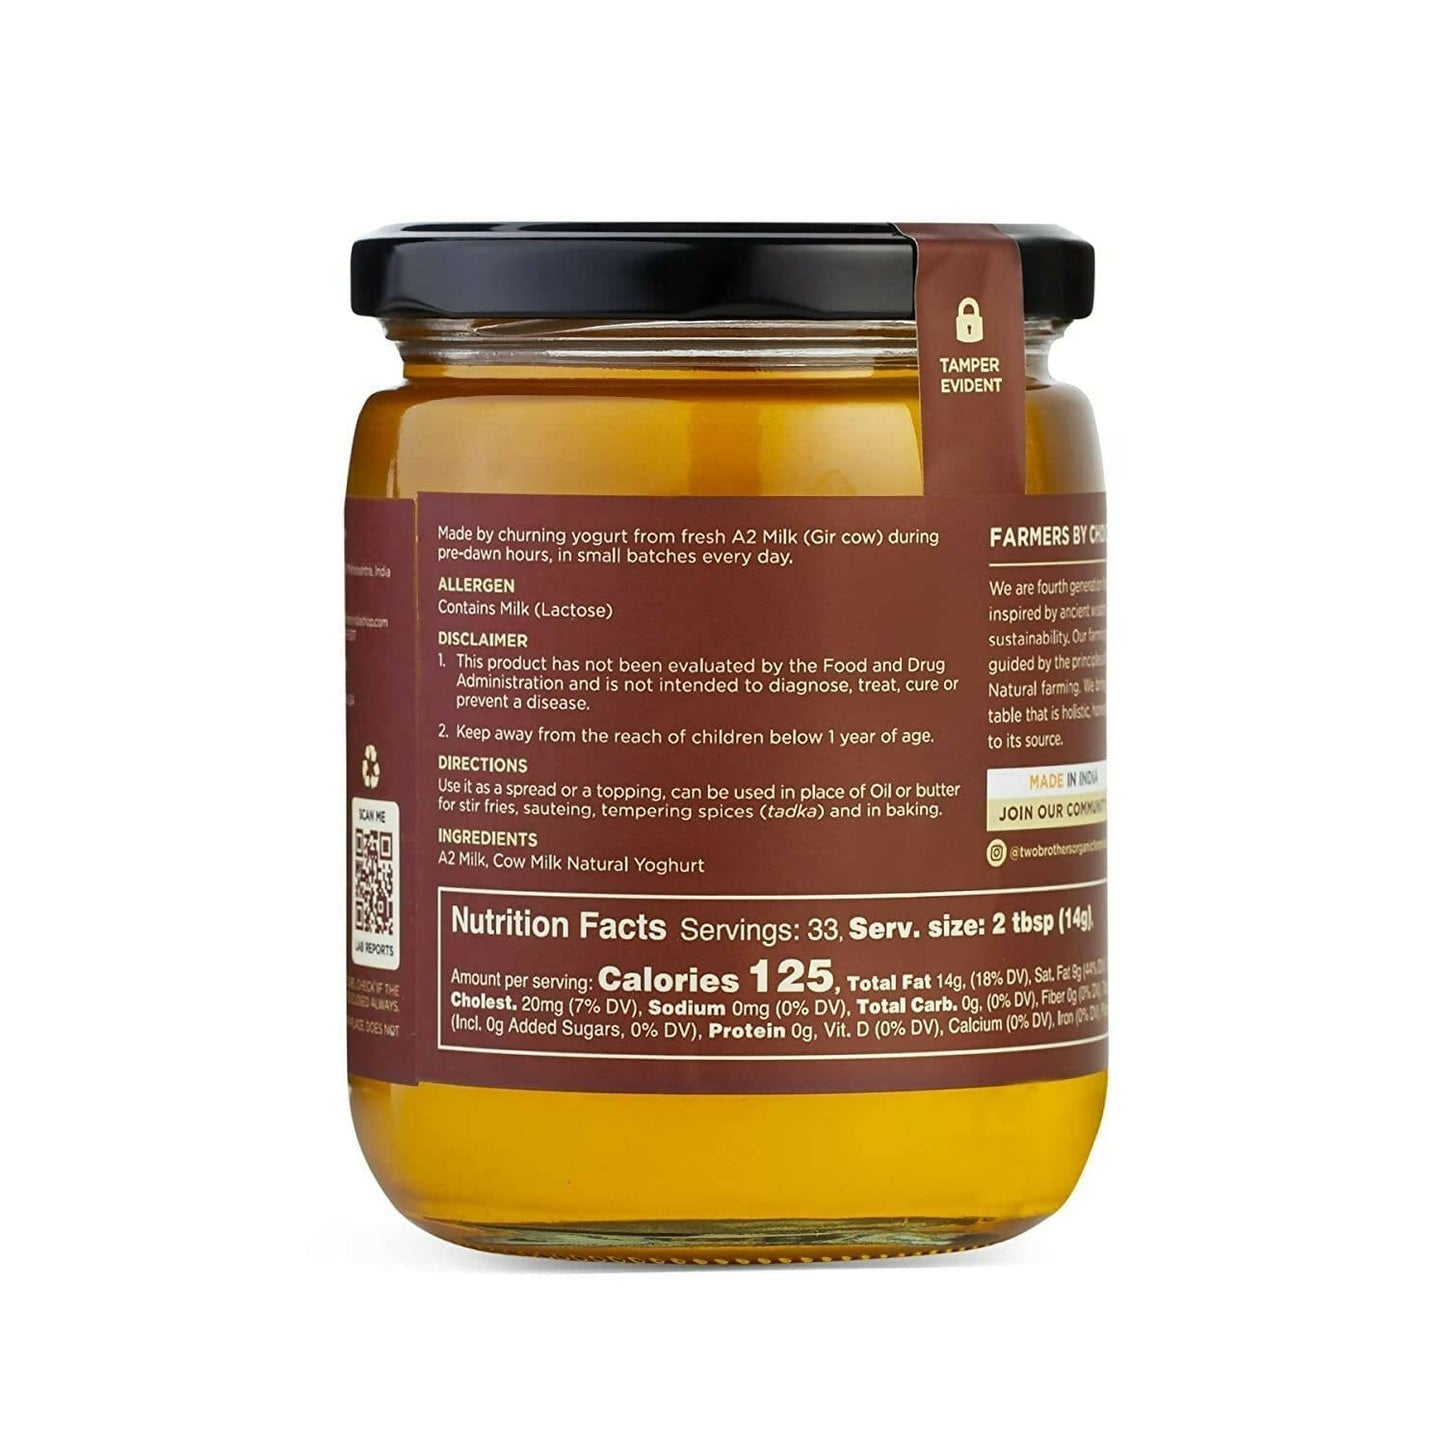 Two Brothers Organic Farms - A2 Ghee Cultured Cow Desi Ghee